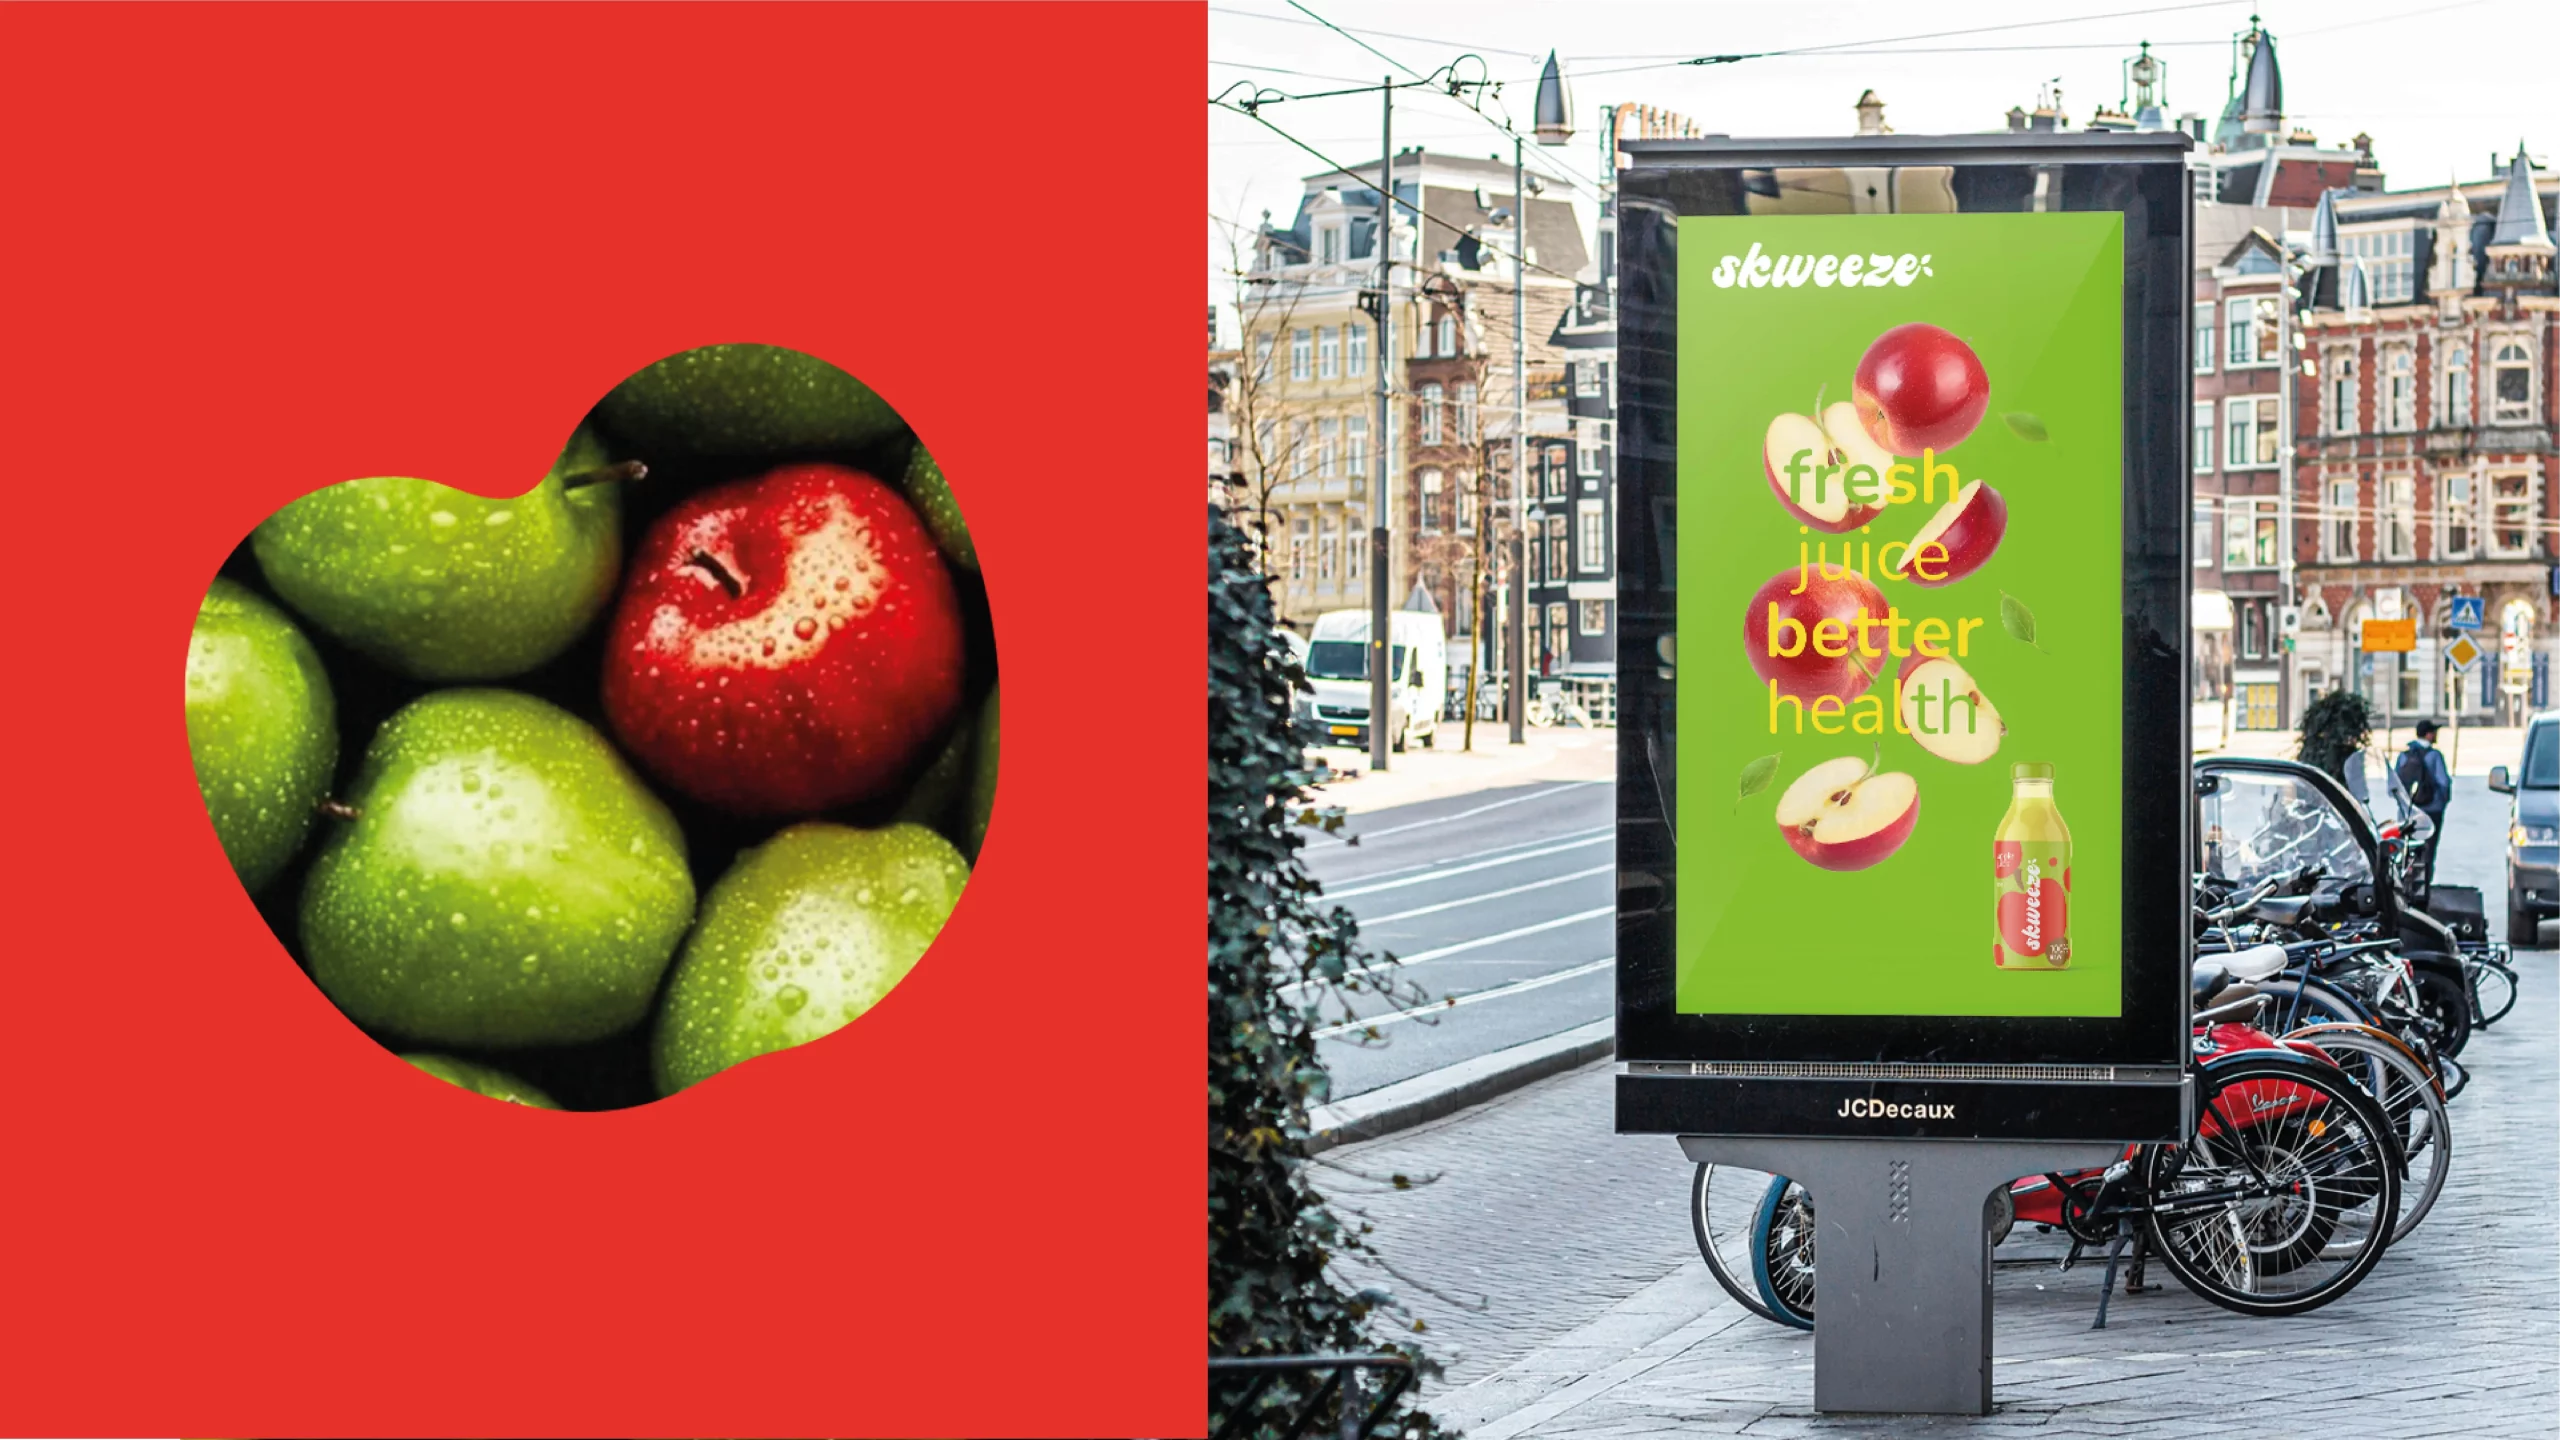 A billboard advertising apples on the side of a street.